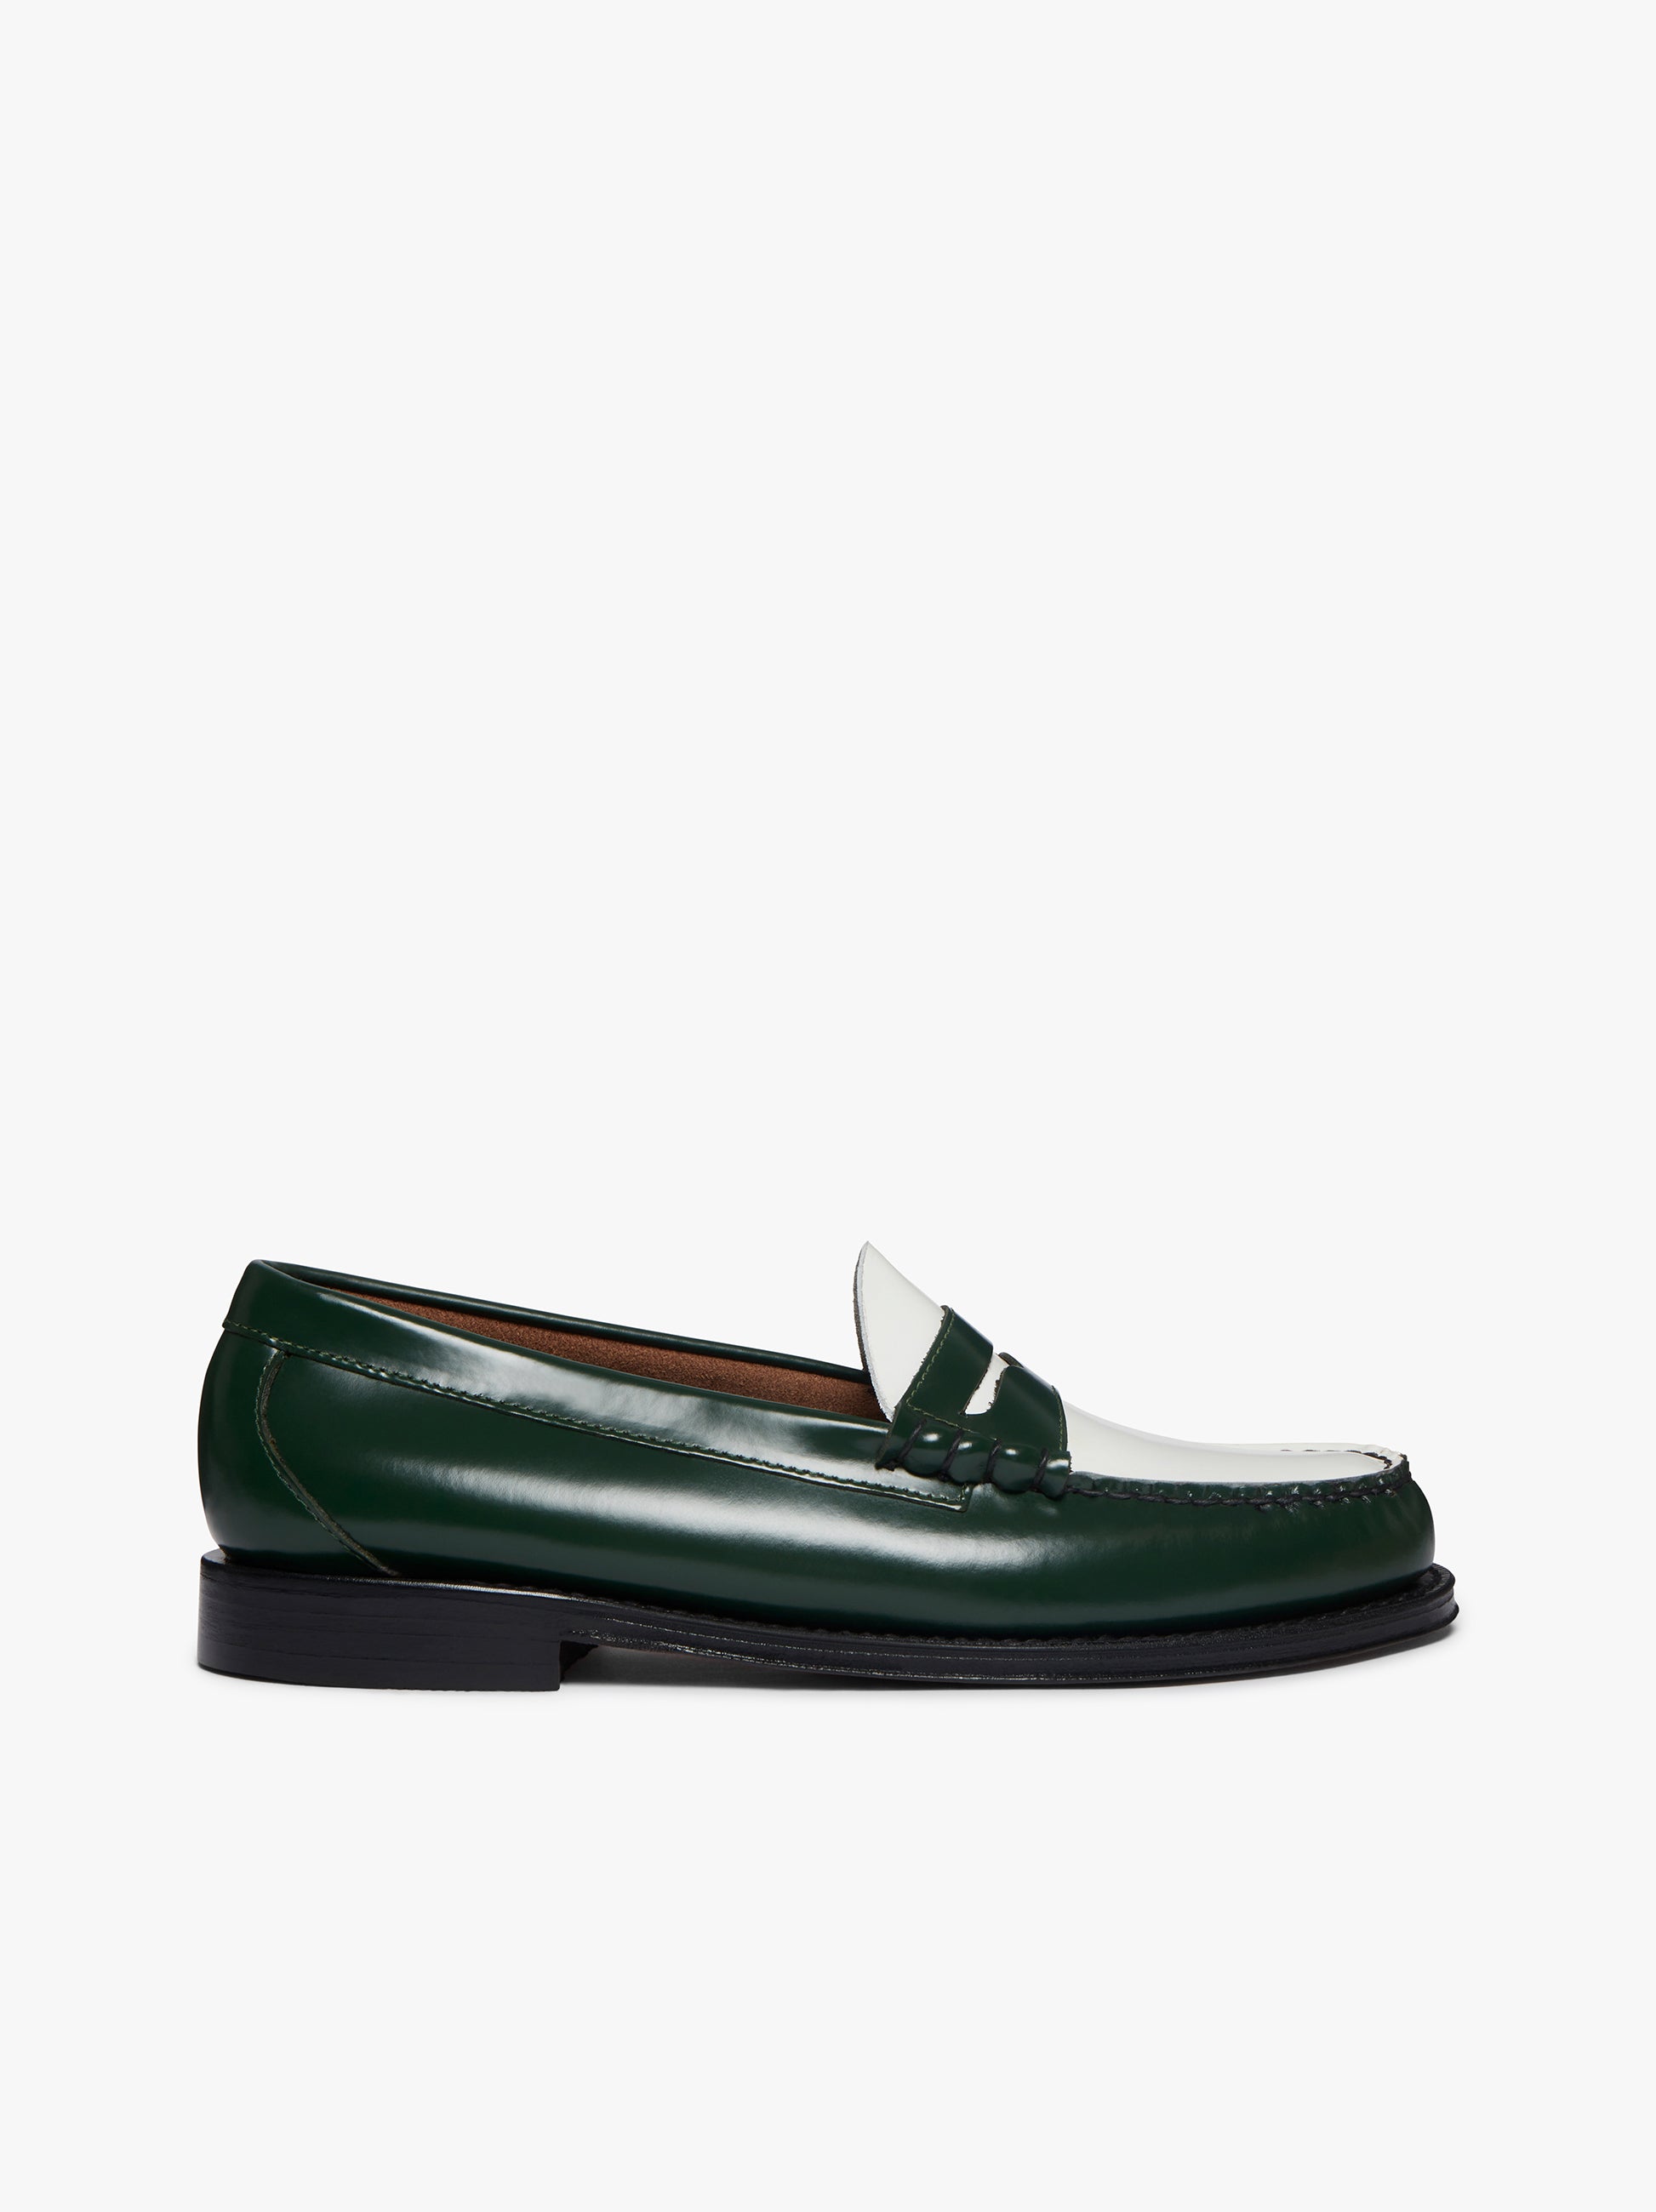 Green And White Loafers | Green And White Penny Loafers – G.H.BASS